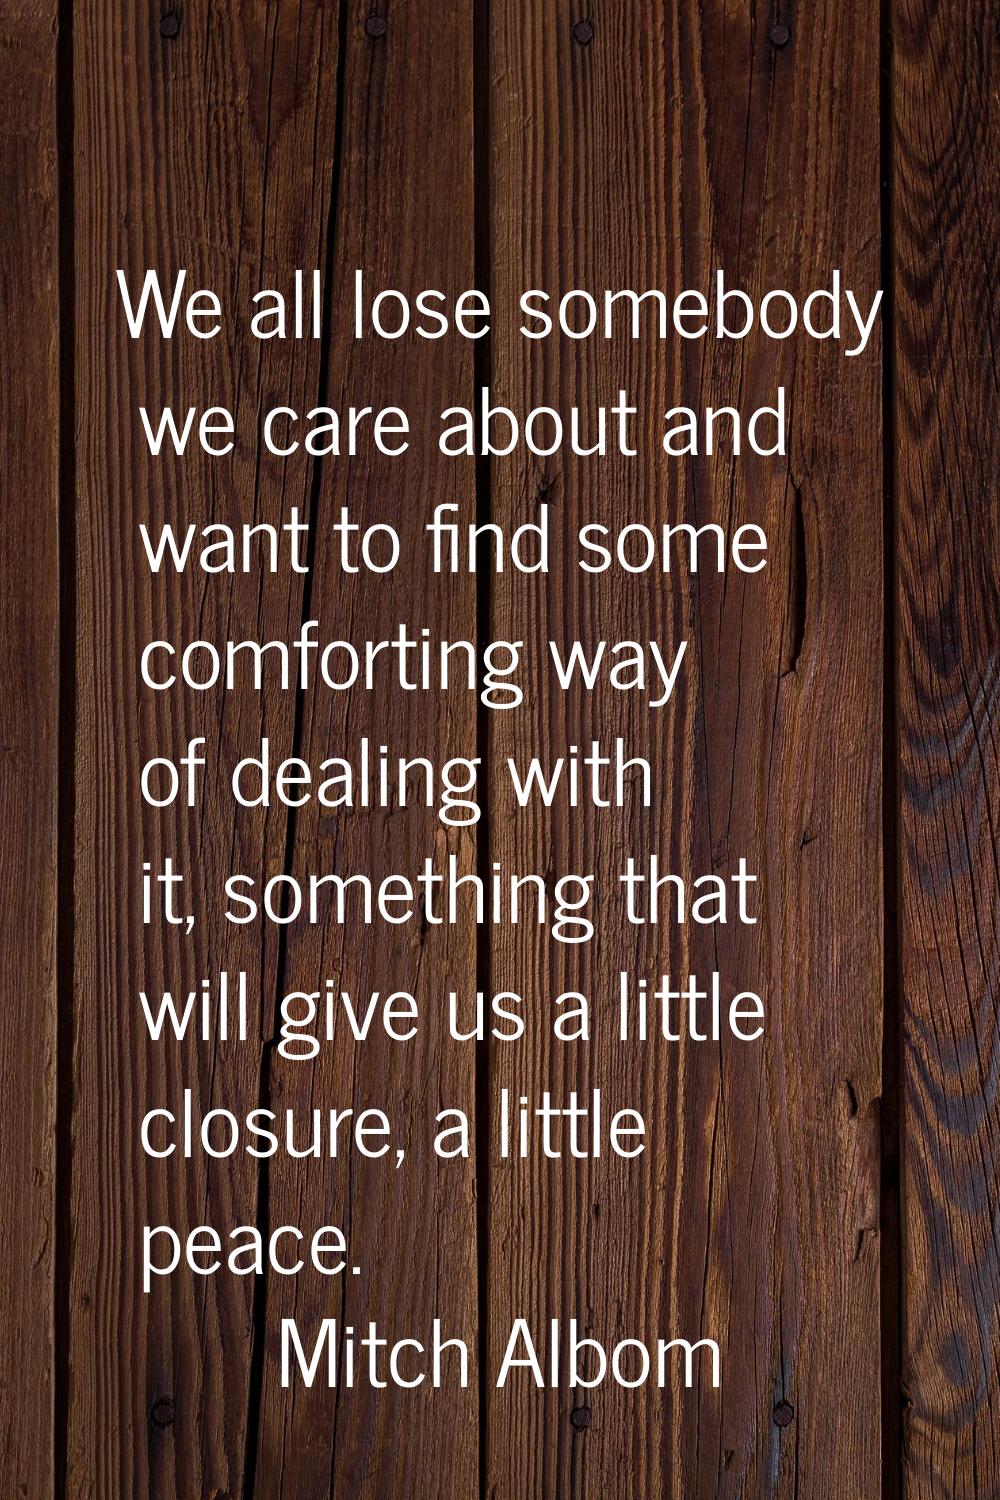 We all lose somebody we care about and want to find some comforting way of dealing with it, somethi